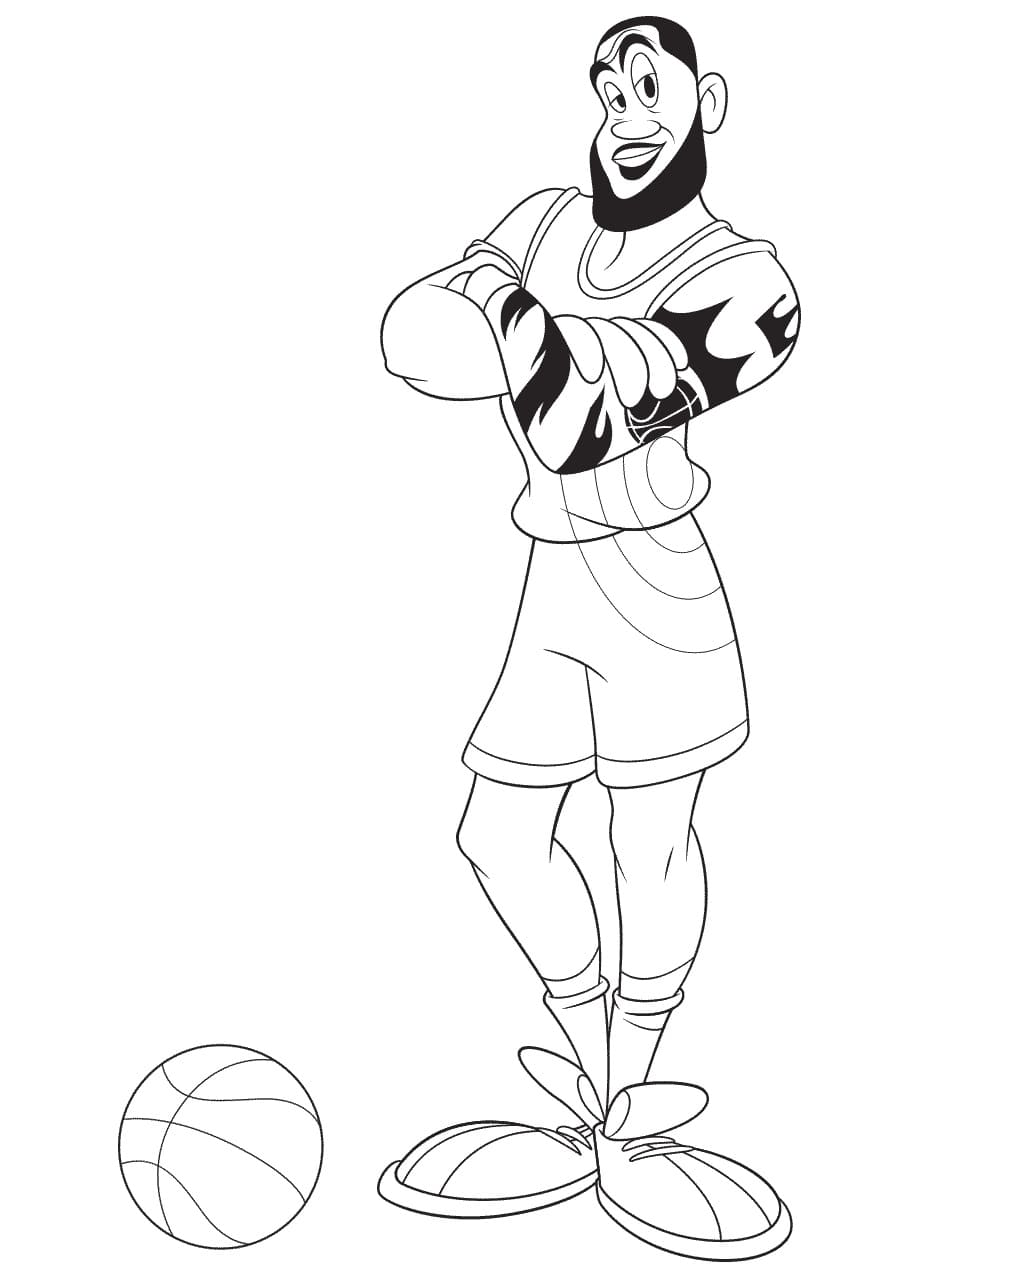 Space Jam 2 LeBron James Coloring Page